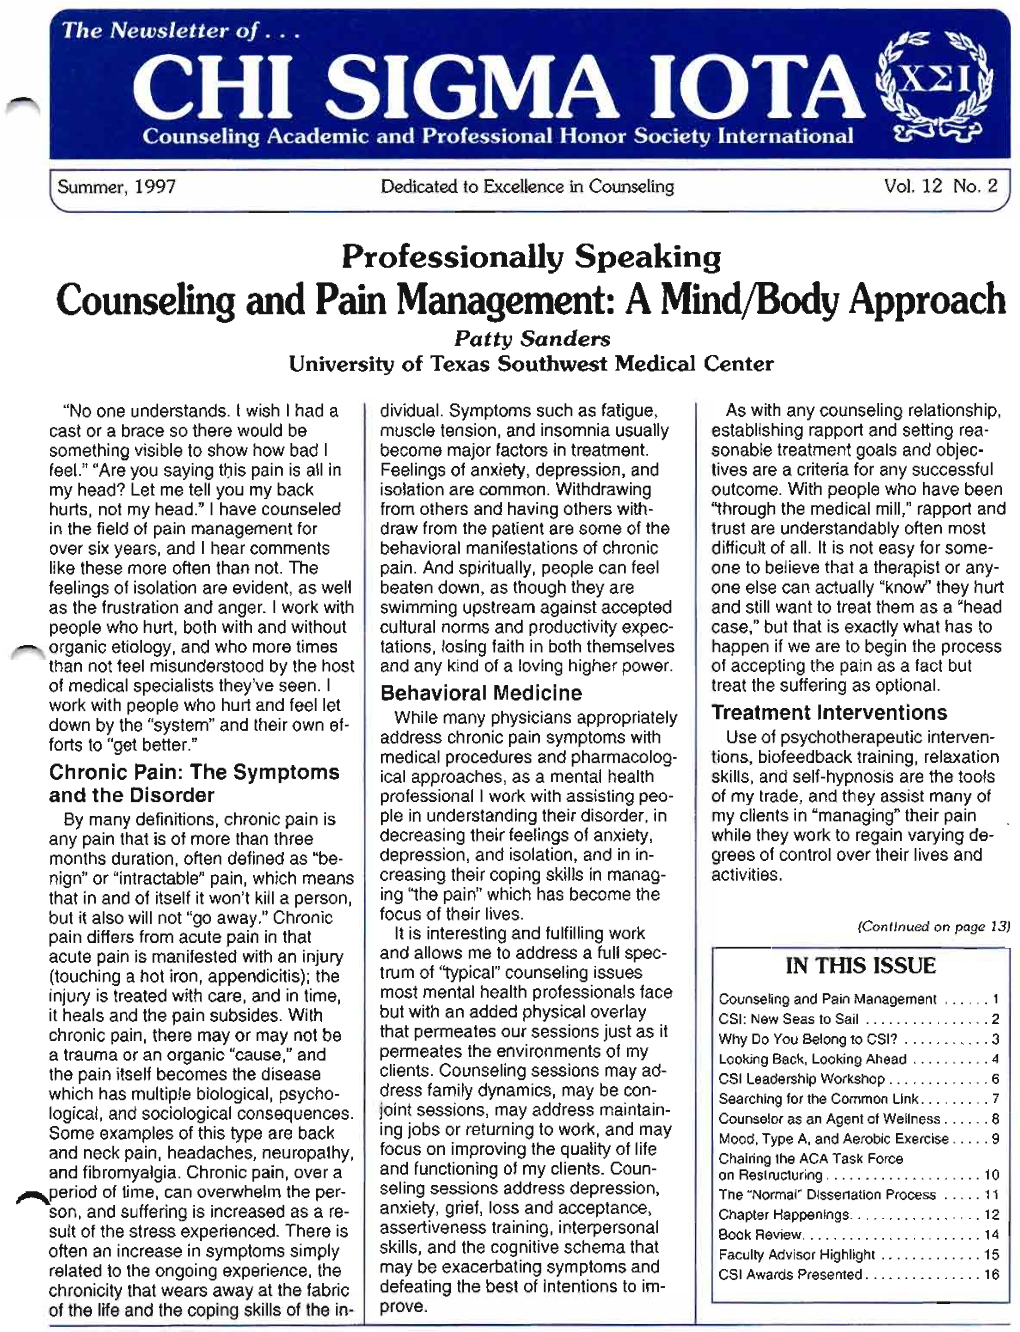 Counseling and Pain Management: a Mind/Body Approach Patty Sanders University of Texas Southwest Medical Center